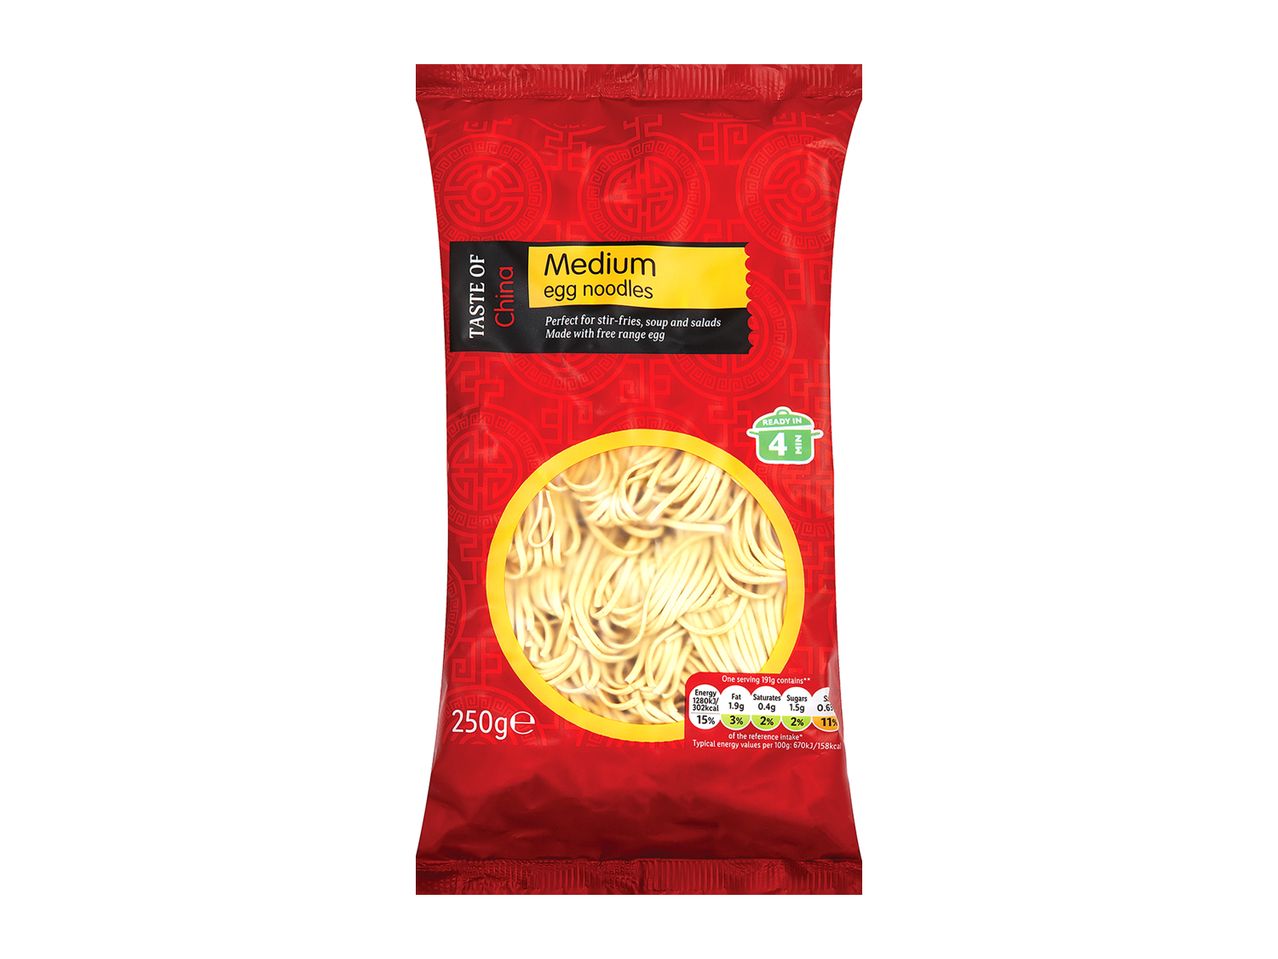 Go to full screen view: Taste of China Medium Egg Noodles - Image 1